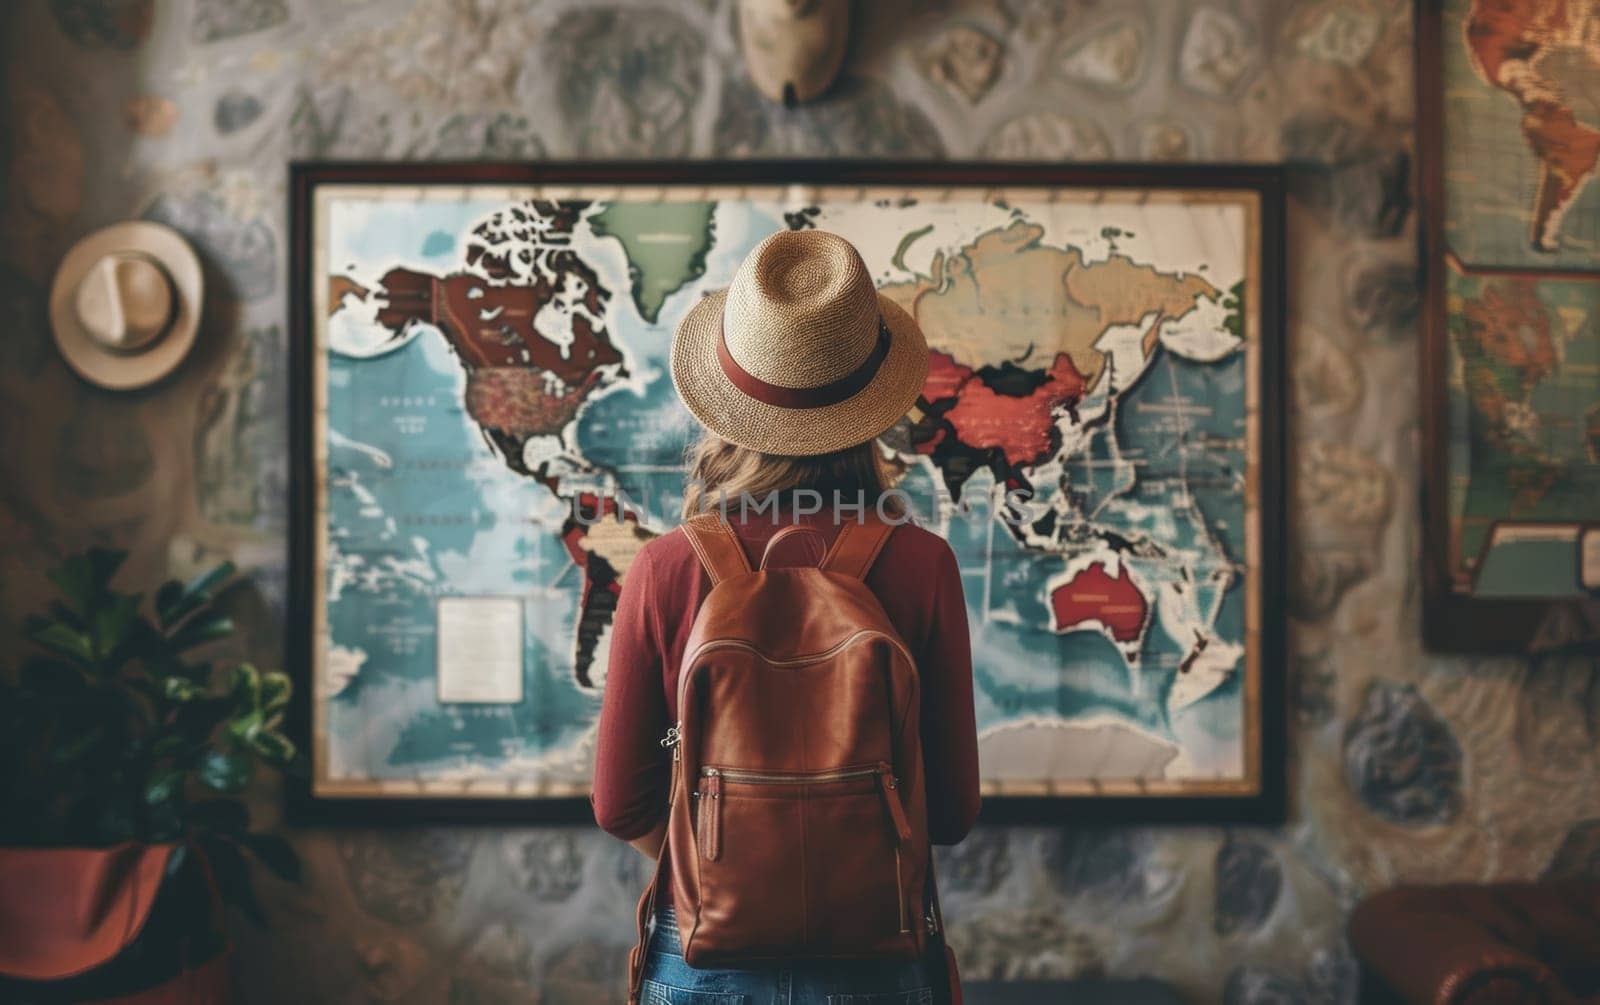 A traveler in a straw hat is engrossed in studying a colorful wall map, contemplating her next destination. The map invites a sense of wonder and exploration. by sfinks